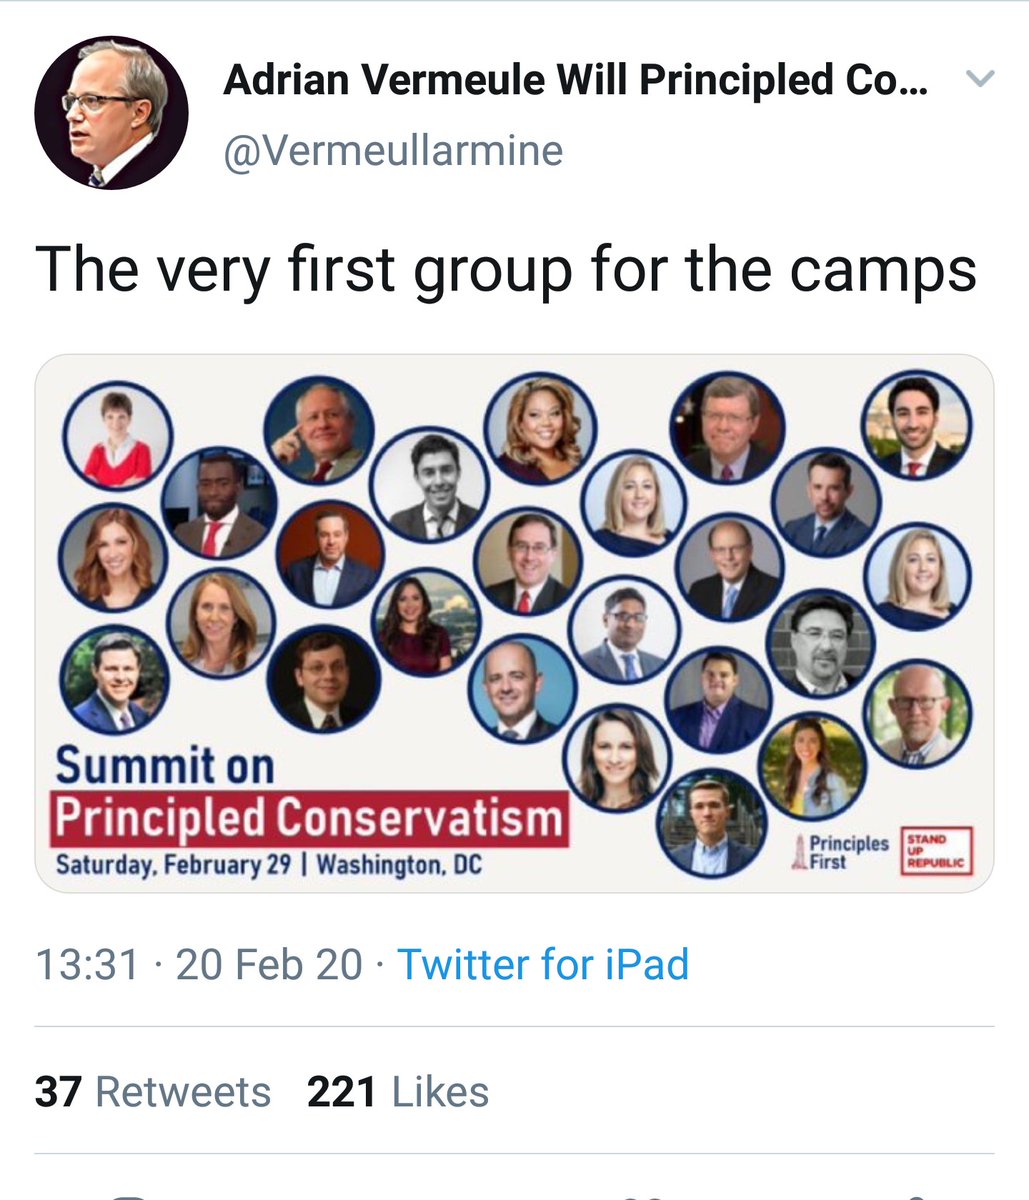 Holocaust as metaphor, ongoing thread. This person is joking about sending people he doesn't 100% agree with to the camps. IE concentration camps.H/T  @dr_jfprice